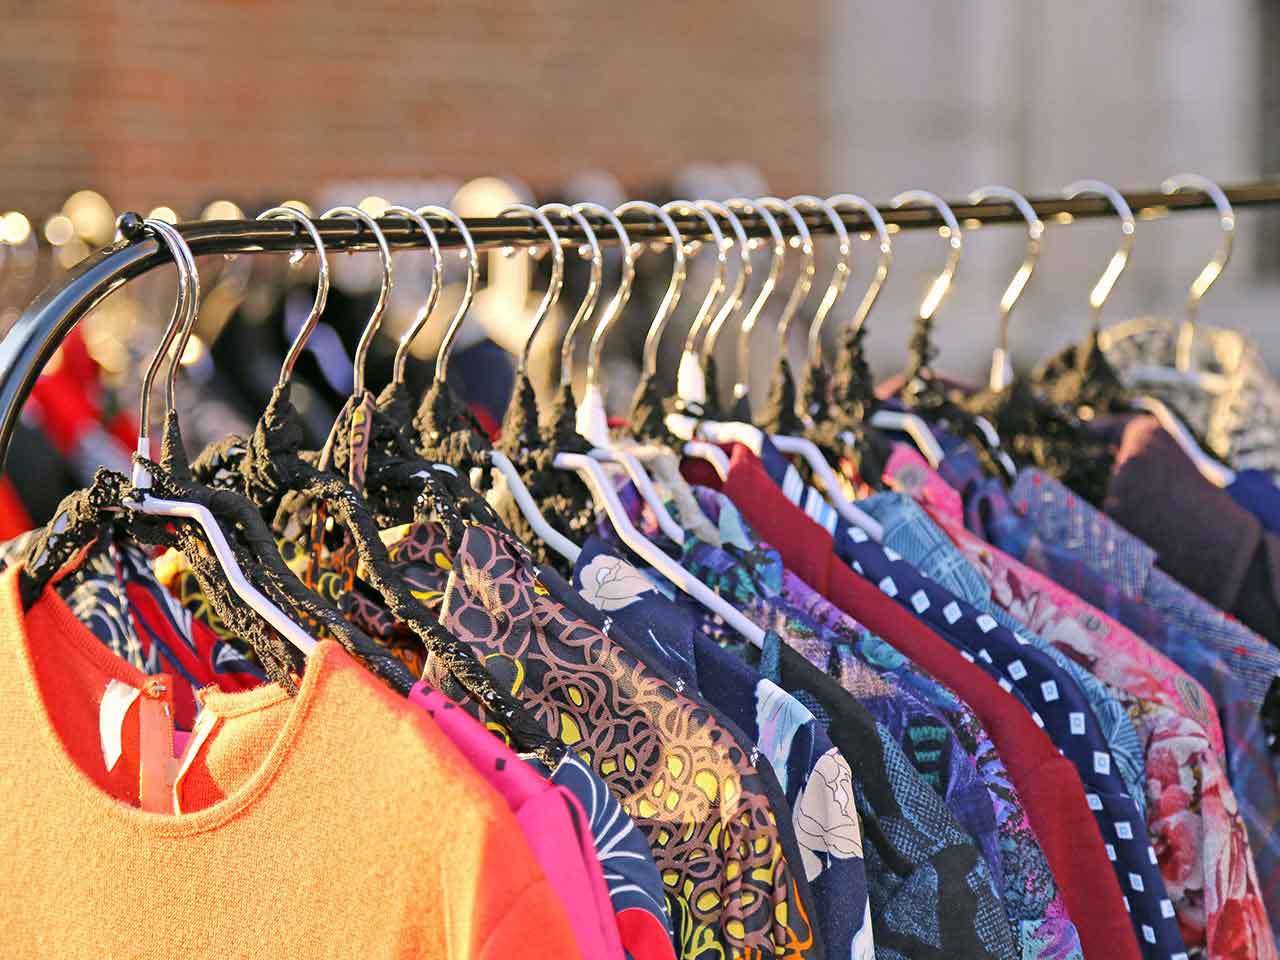 Where And How To Sell Your Vintage Clothing Saga and Where To Sell Vintage Clothing